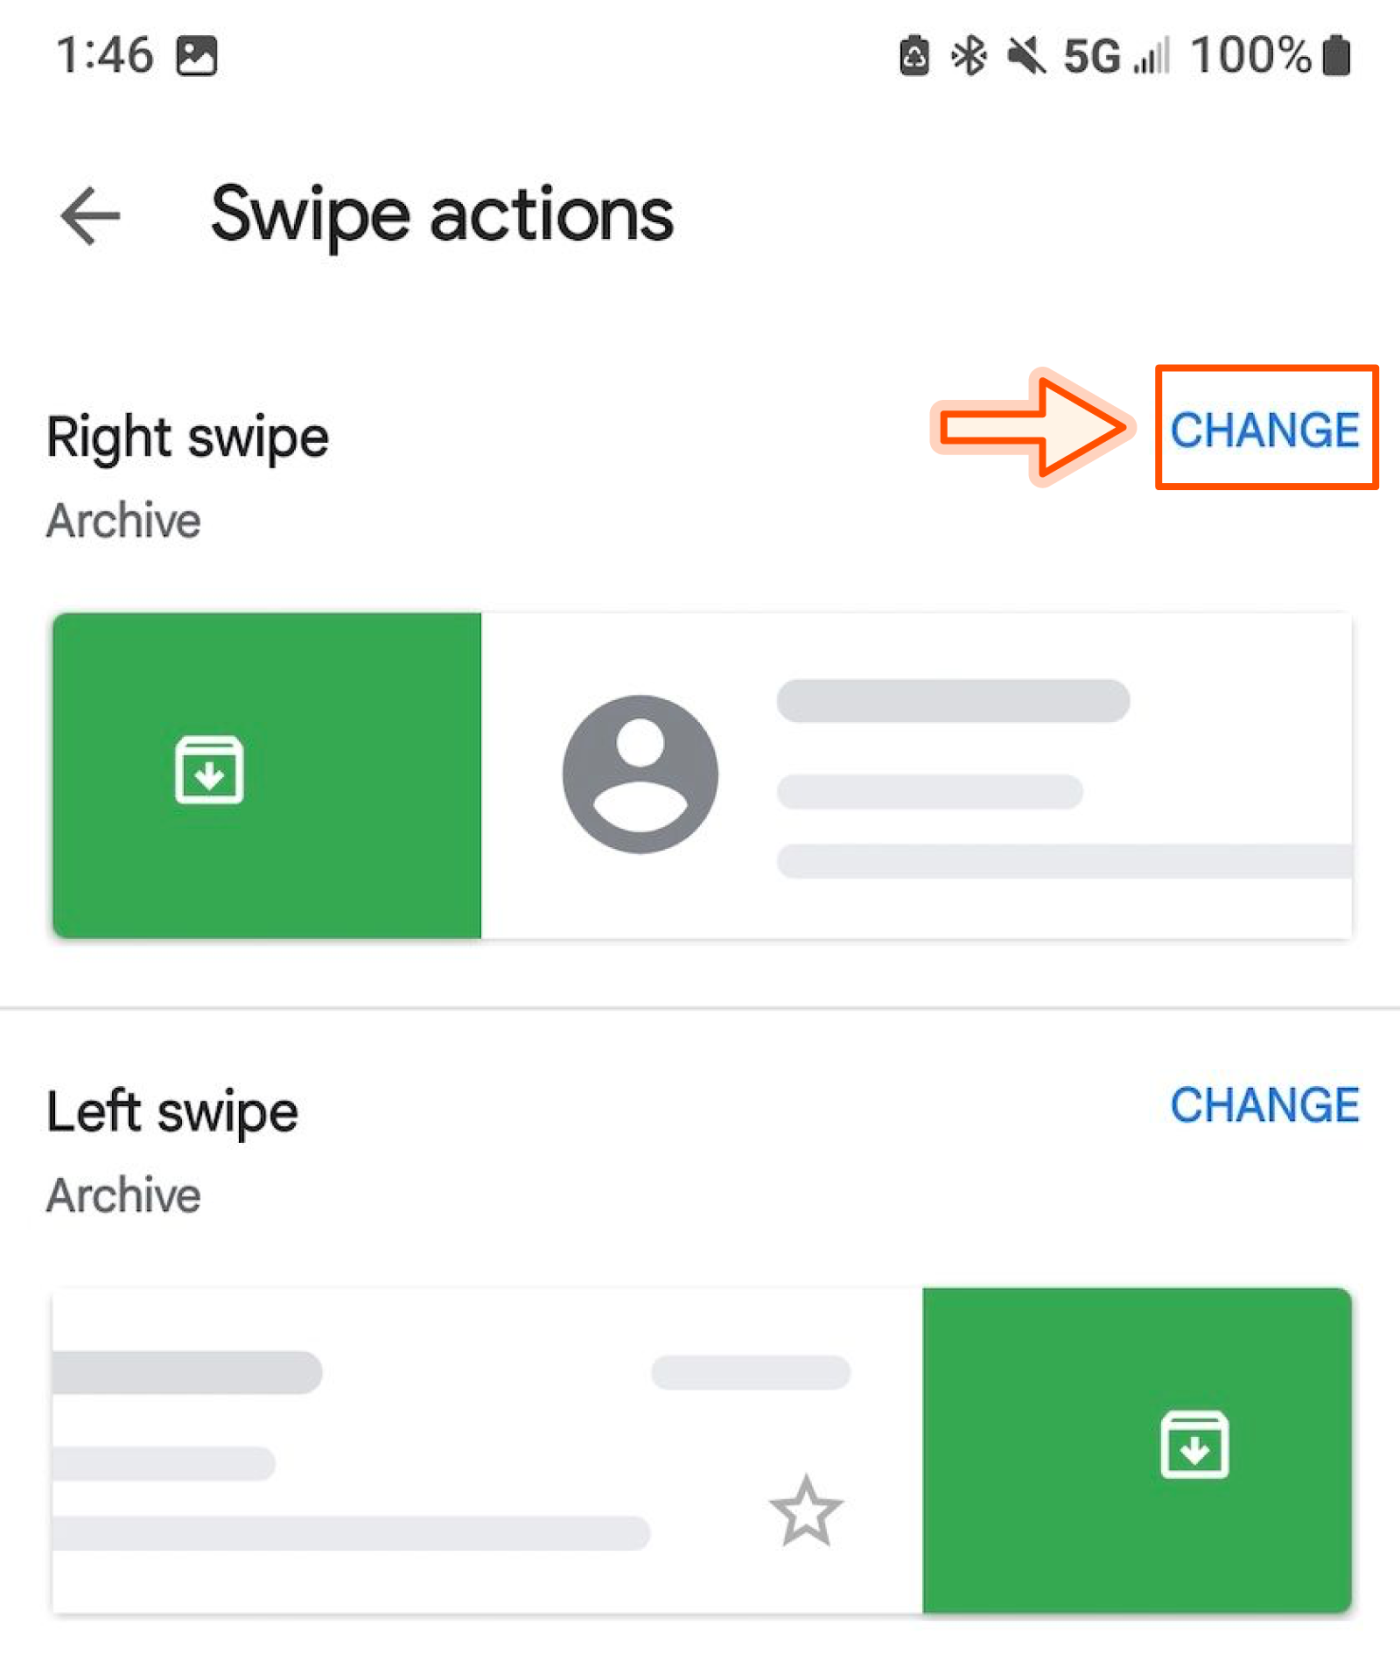 Screenshot of swipe actions on Gmail app on Android.